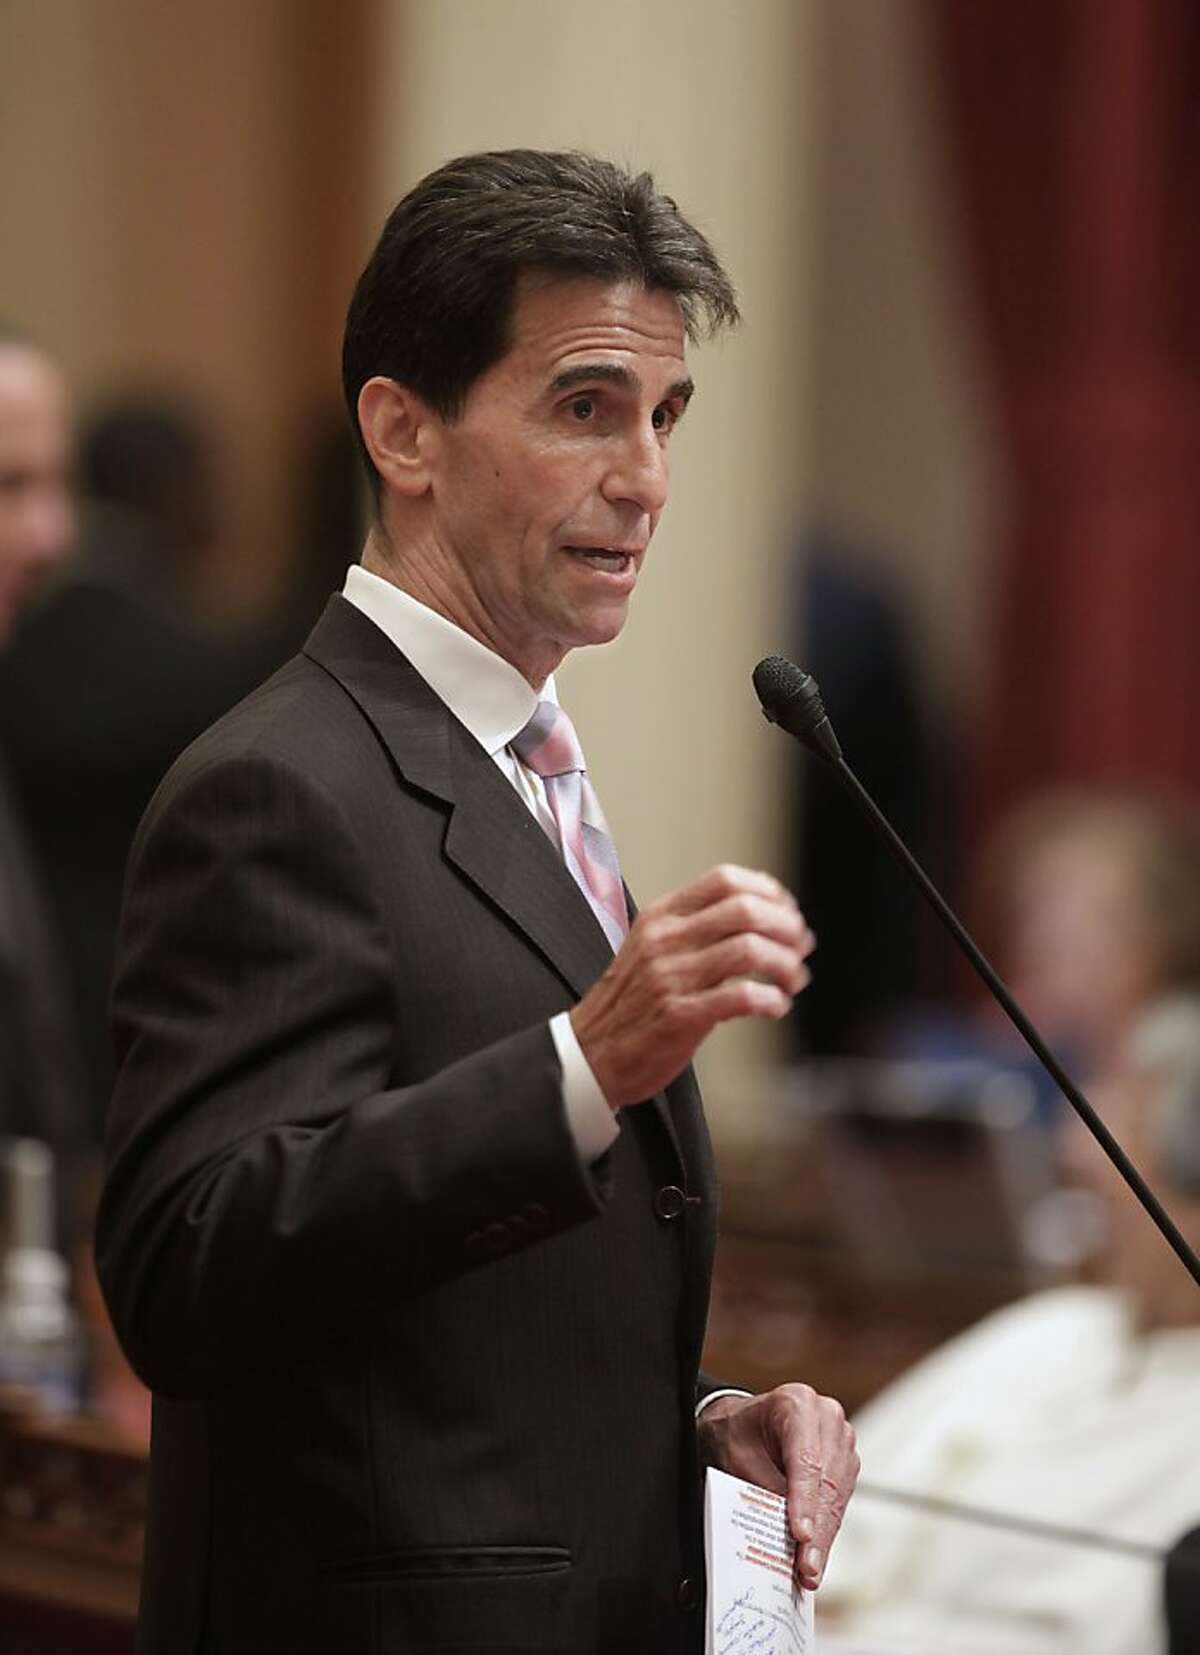 In this photo taken Tuesday, June 28 2011, State Sen. Mark Leno, D-San Francisco is seen at the Capitol in Sacramento, Calif., Leno's measure requiring public schools to teach the historical contributions of gay Americans, was approved by the Assembly on49-25 on a party line vote, Tuesday July 5, 2011. If signed into law by Gov. Jerry Brown, California would be the first state to require public schools to include the contributions of gays and lesbians in their social studies curriculum.